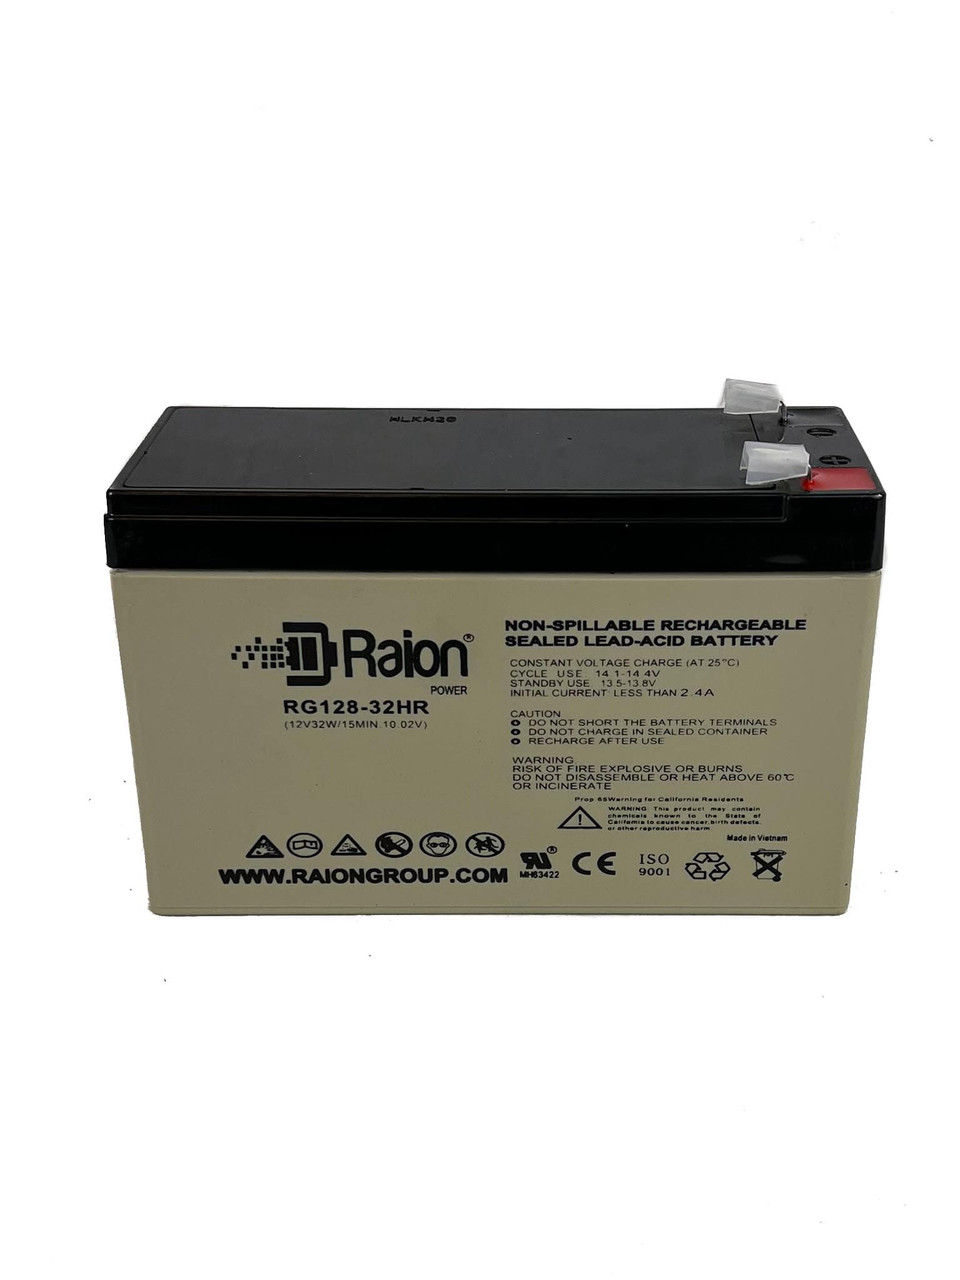 Raion Power 12V 7.5Ah 32W Rechargeable Battery for Nair NR12-7.5